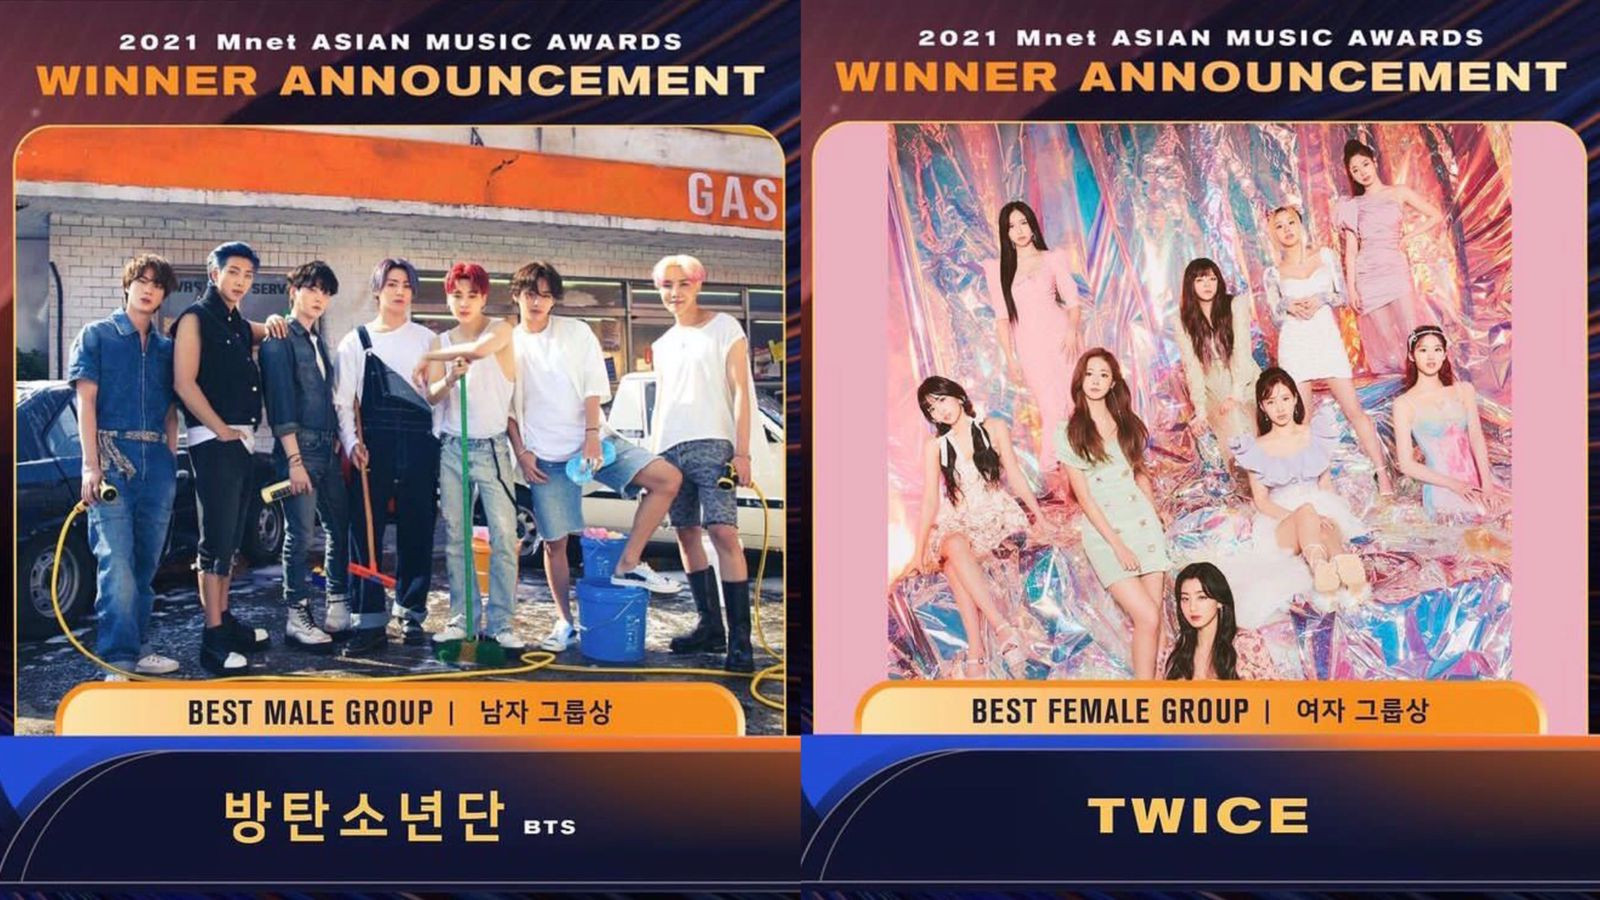  Best Male and Female Group. (Instagram.com/mnet_mama) 